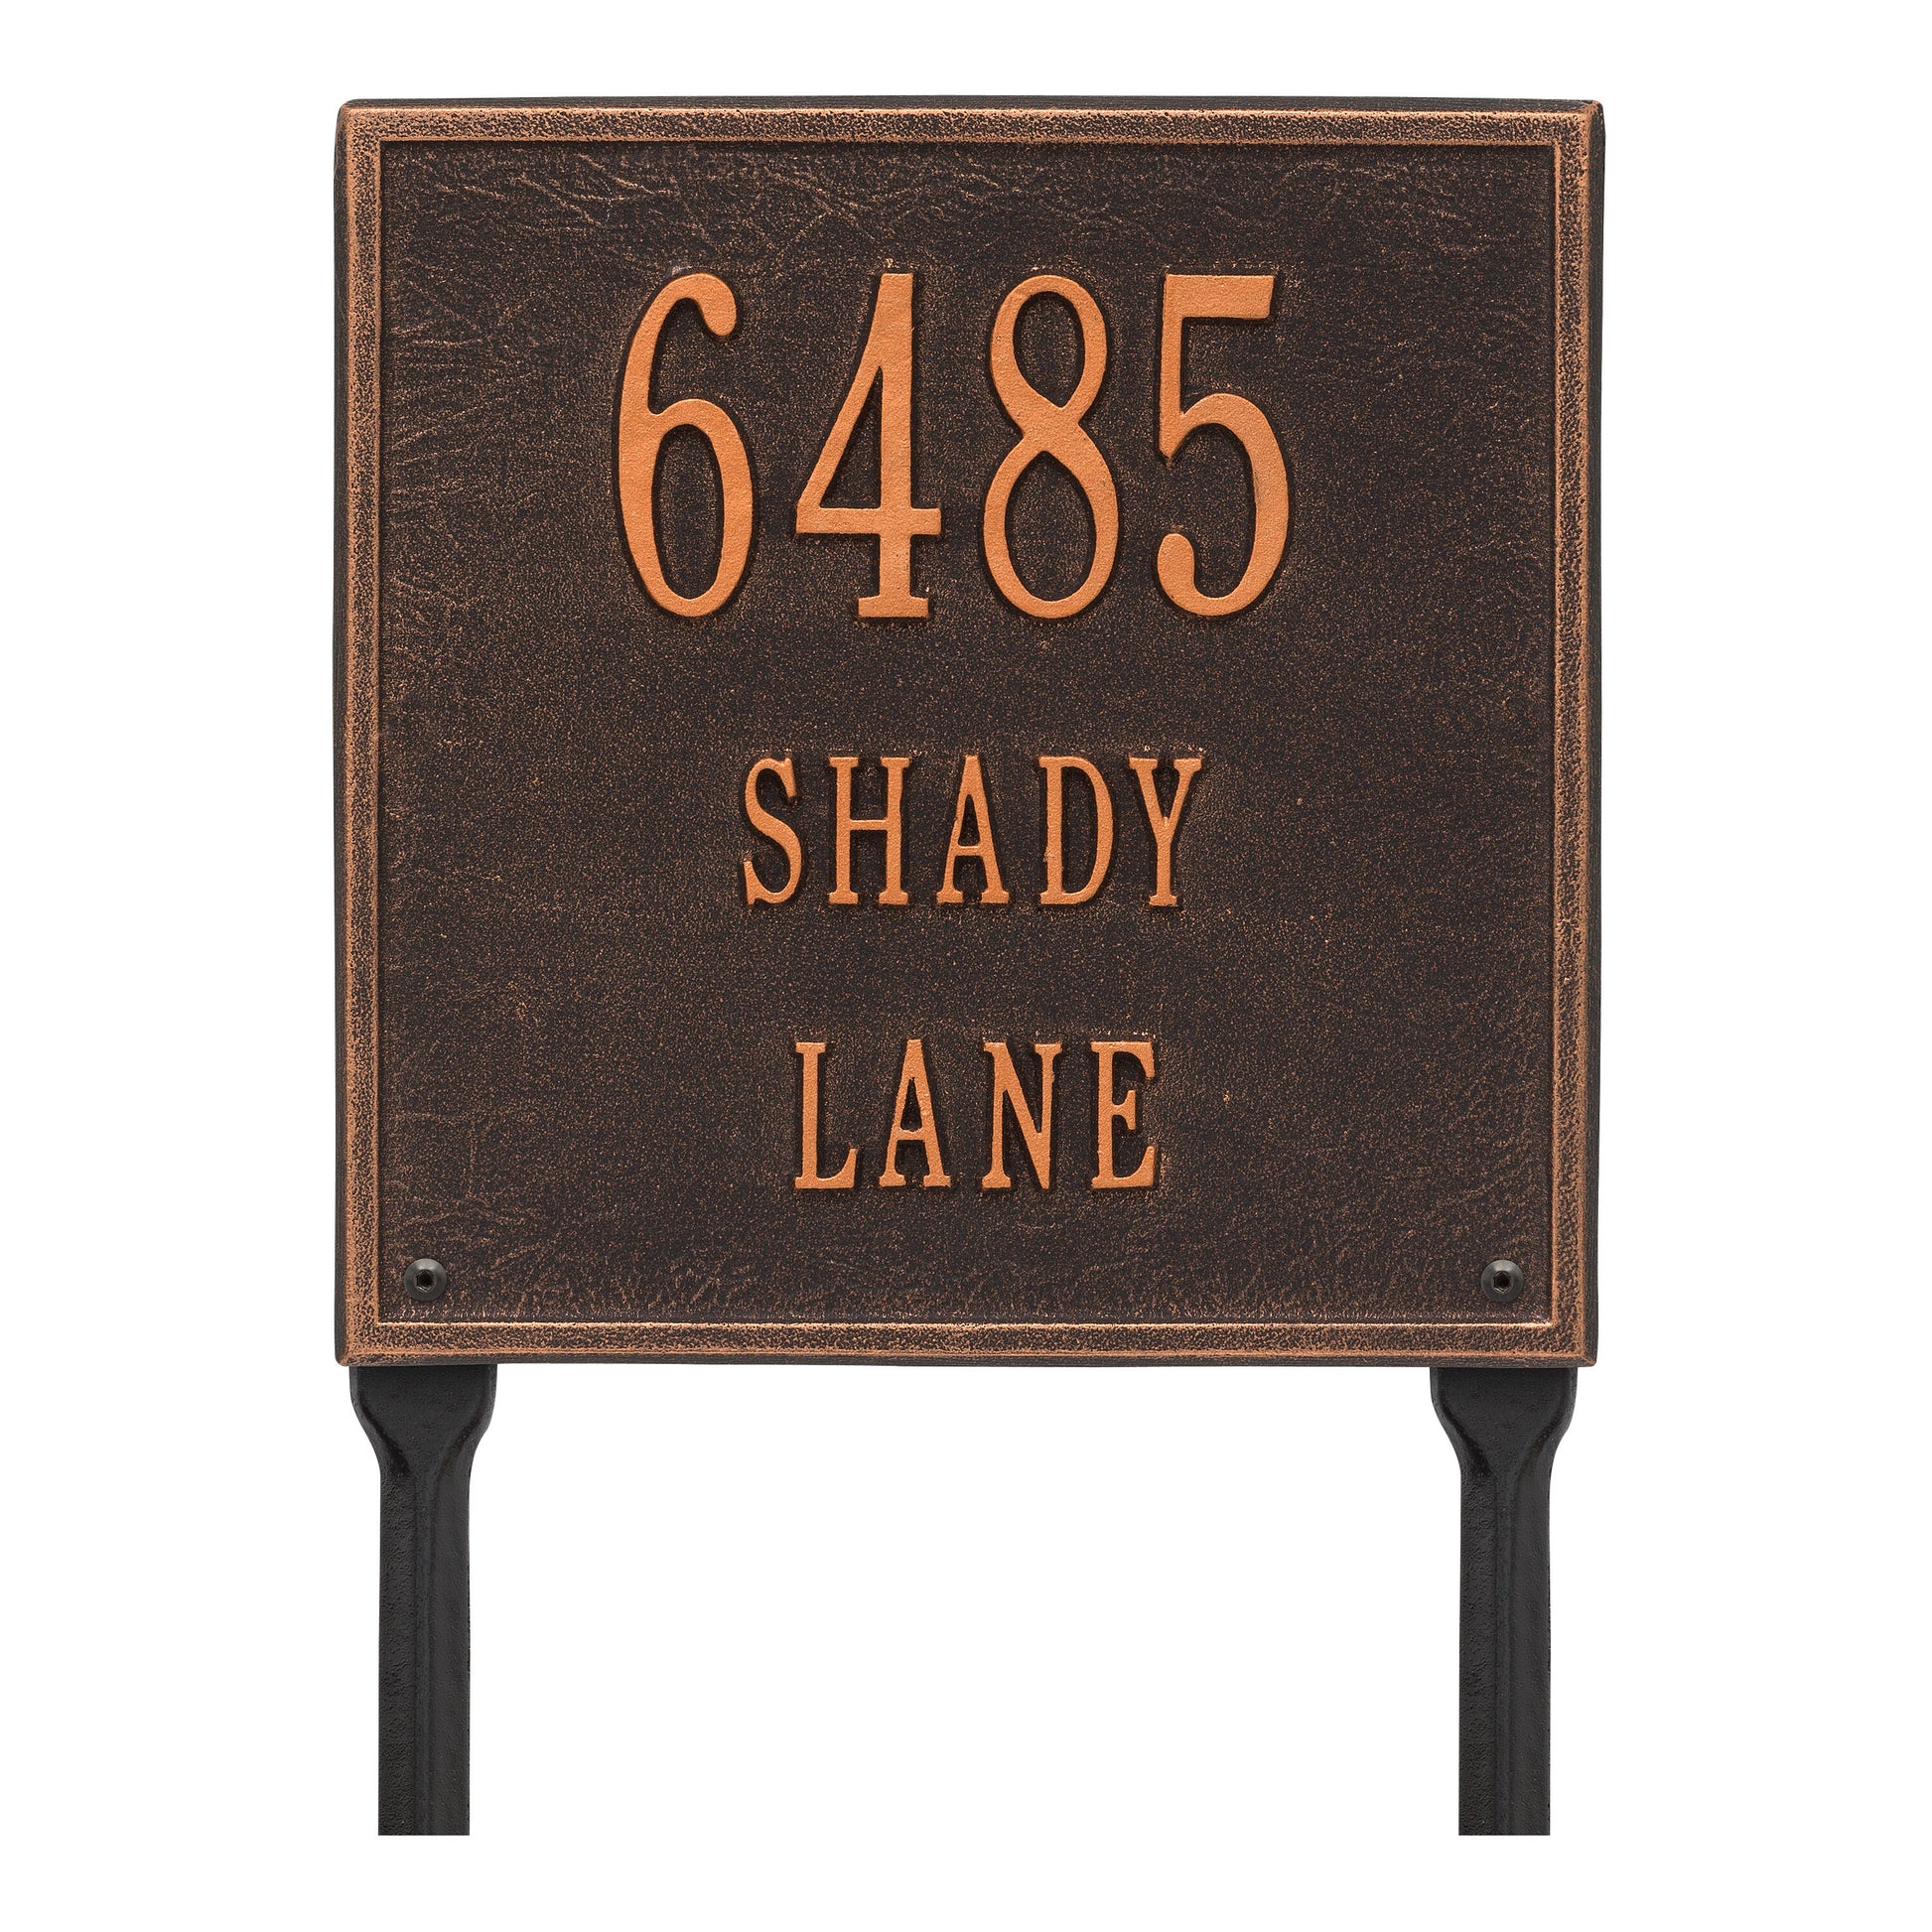 Whitehall Products Personalized Square Standard Lawn Plaque Three Line Bronze/gold